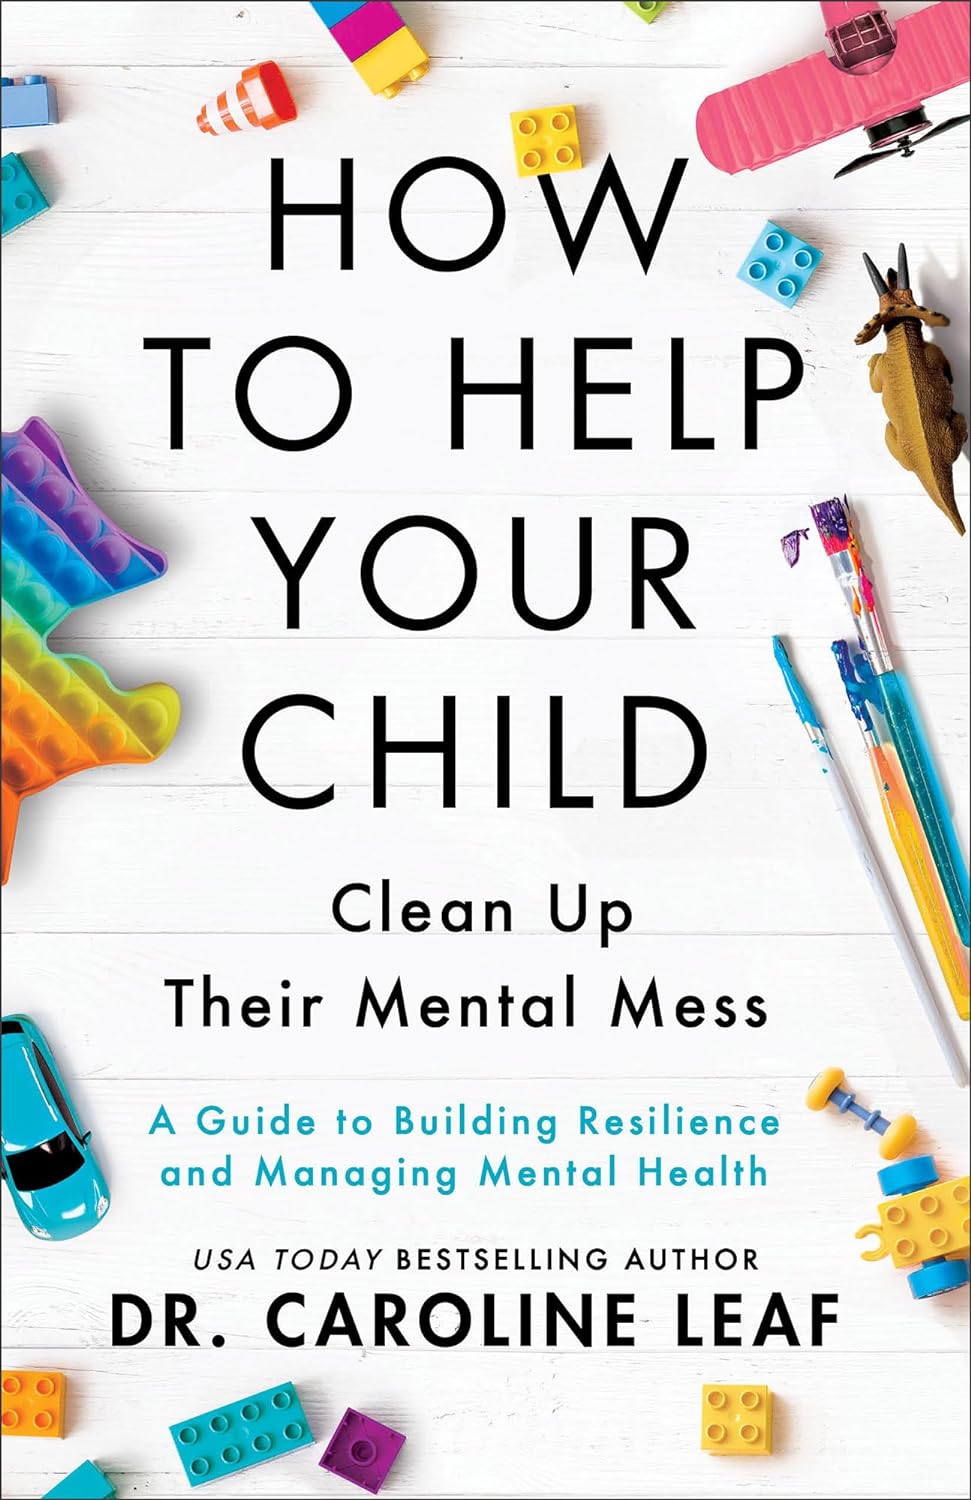 How to Help Your Child Clean Up Their Mental Mess – A Guide to Building Resilience and Managing Mental Health